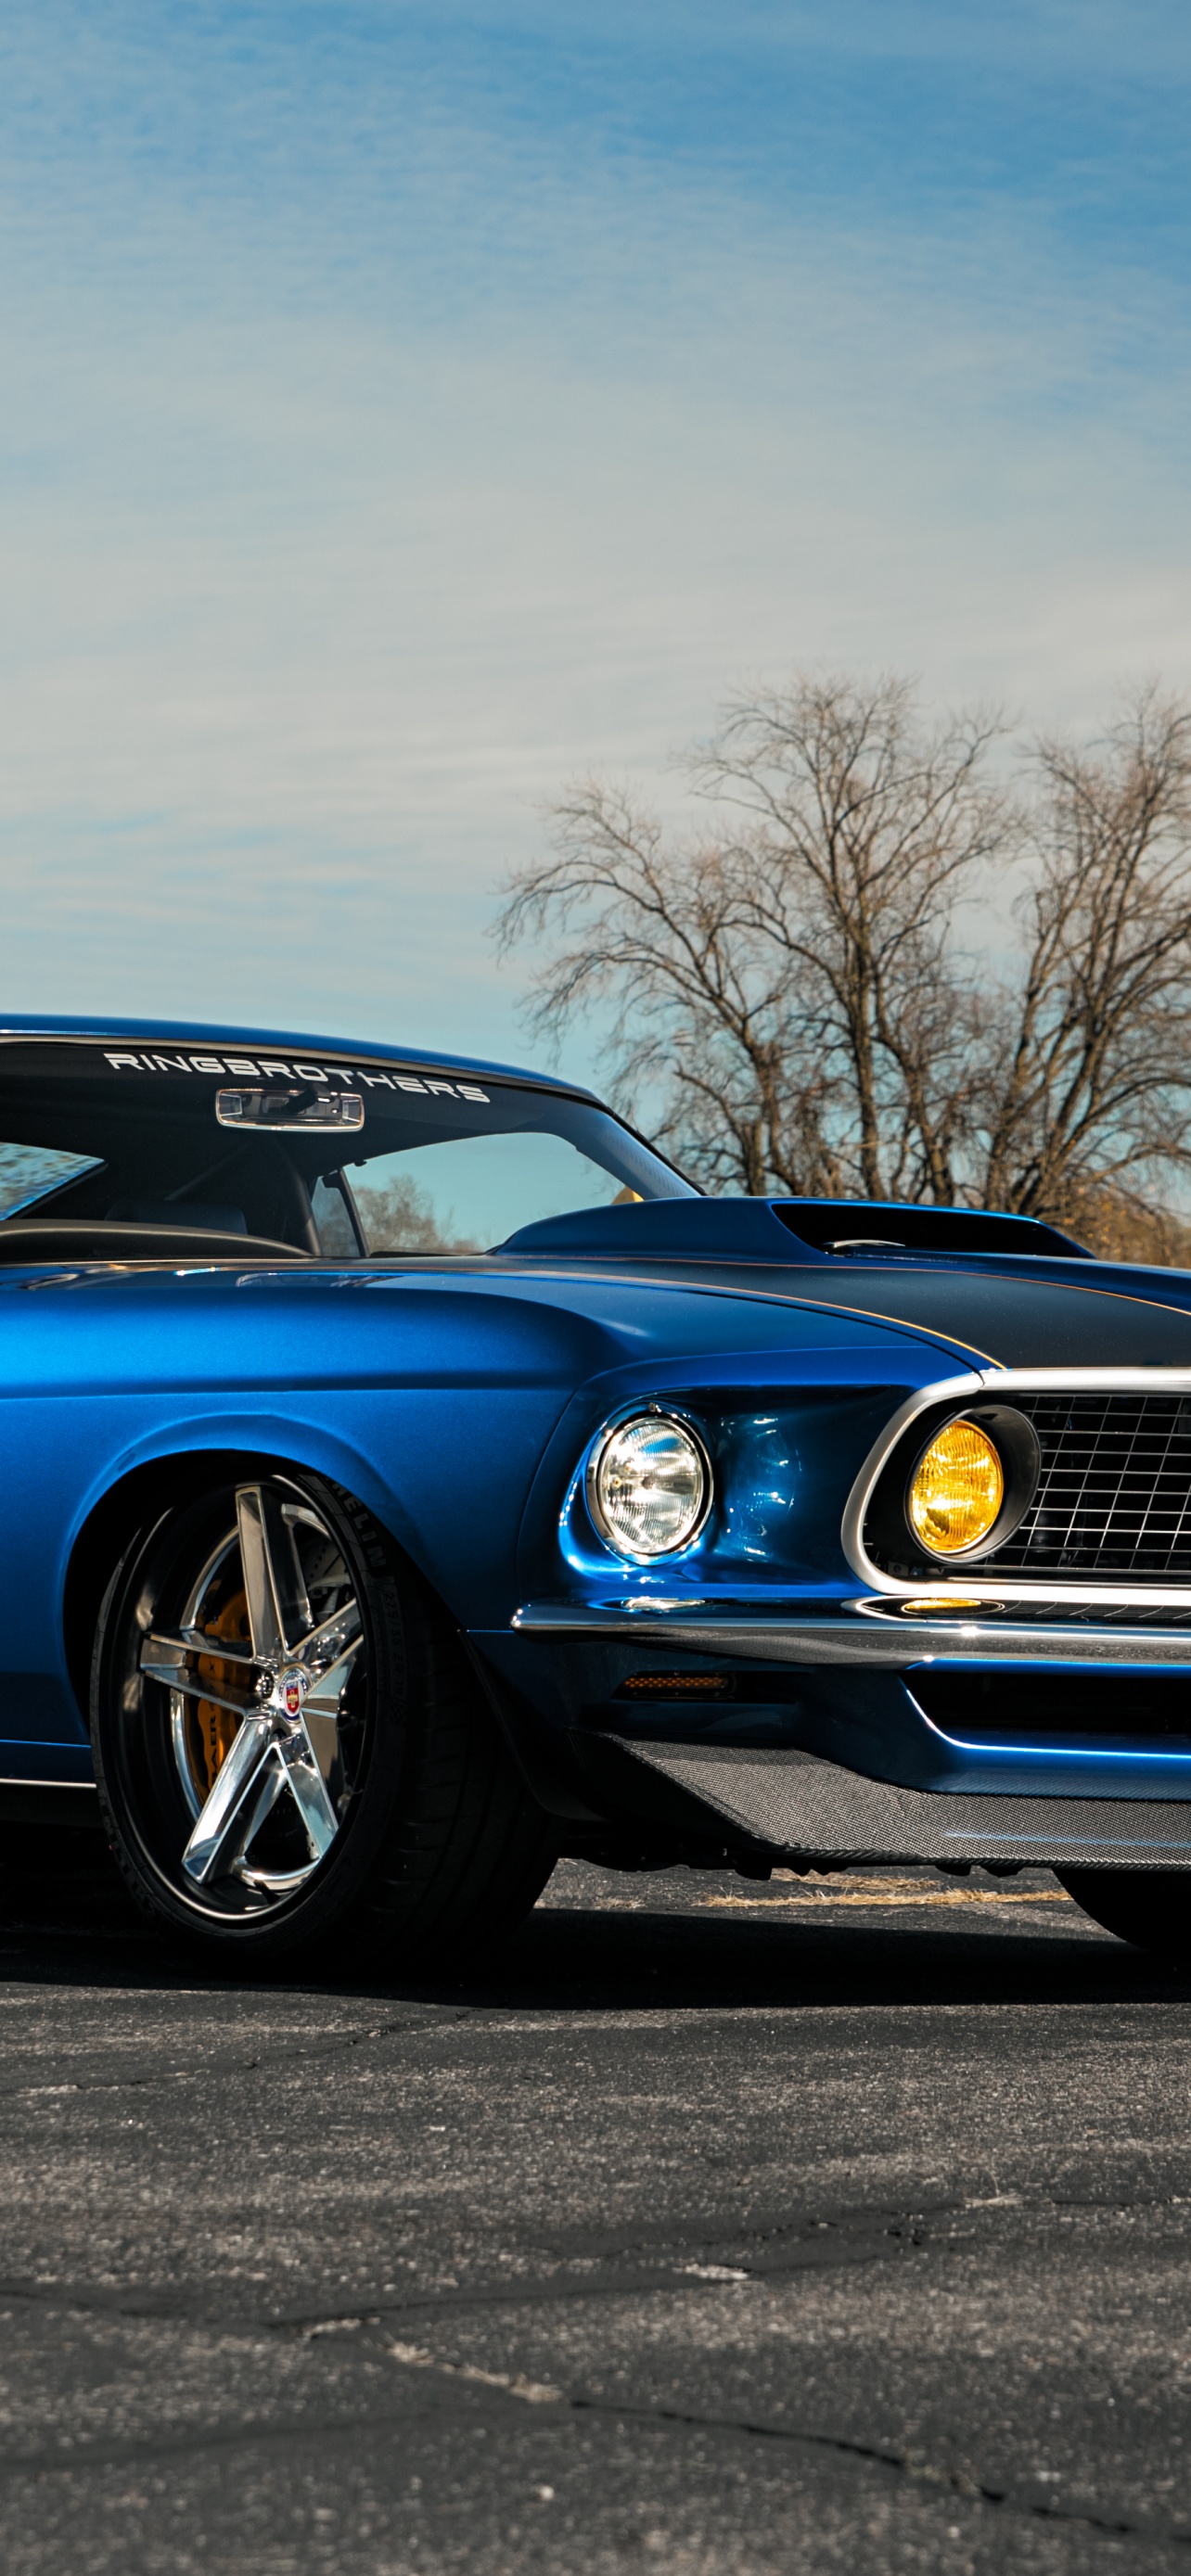 Ringbrothers 1969 Ford Mustang Mach 1 Wallpaper 4K, Muscle cars, 5K, Cars